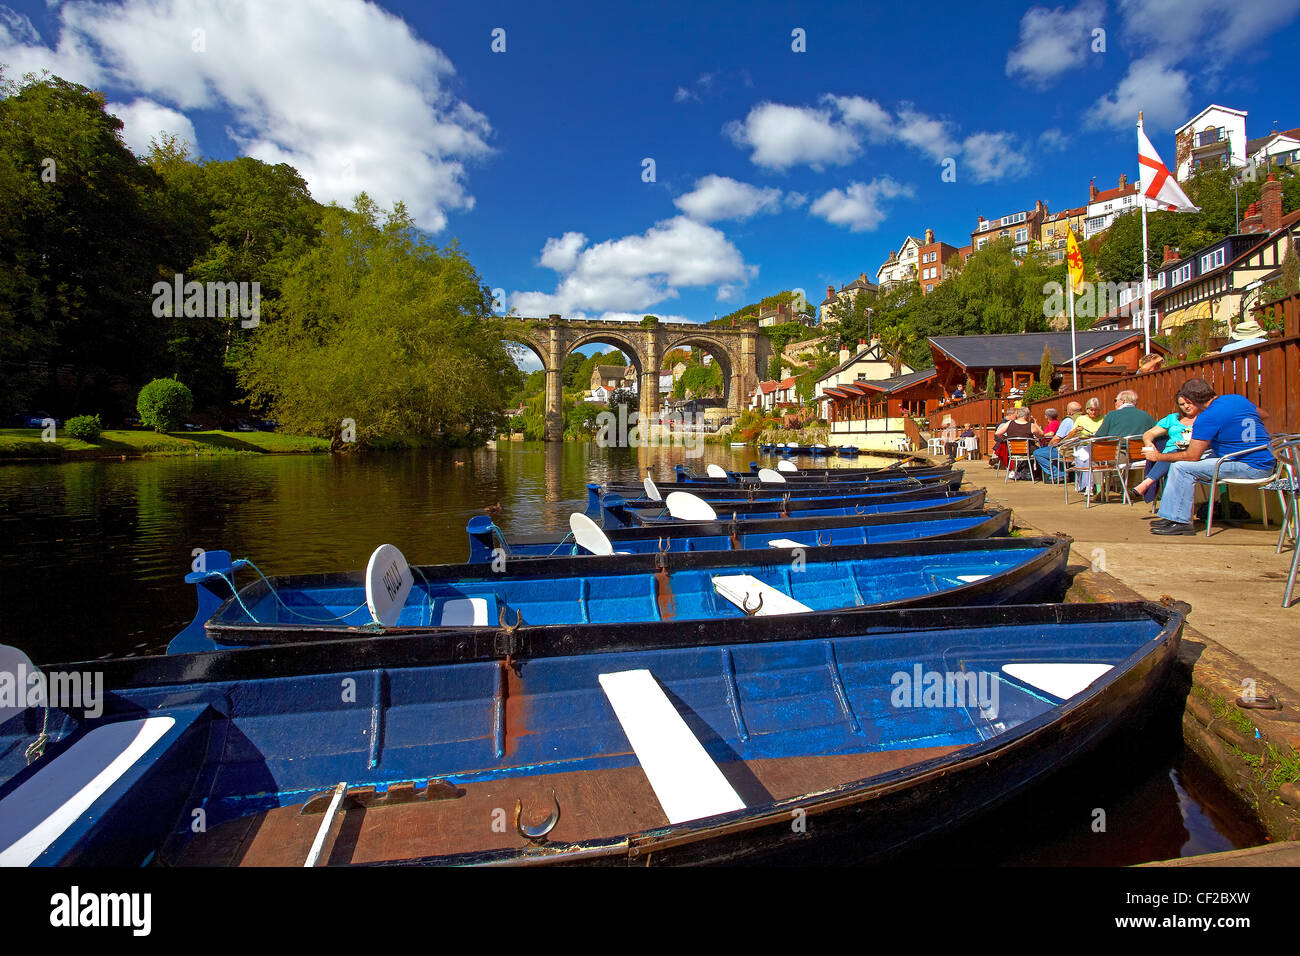 Rowing boats for hire and people enjoying a drink at a cafe on the riverside of the River Nidd at Knaresborough. Stock Photo